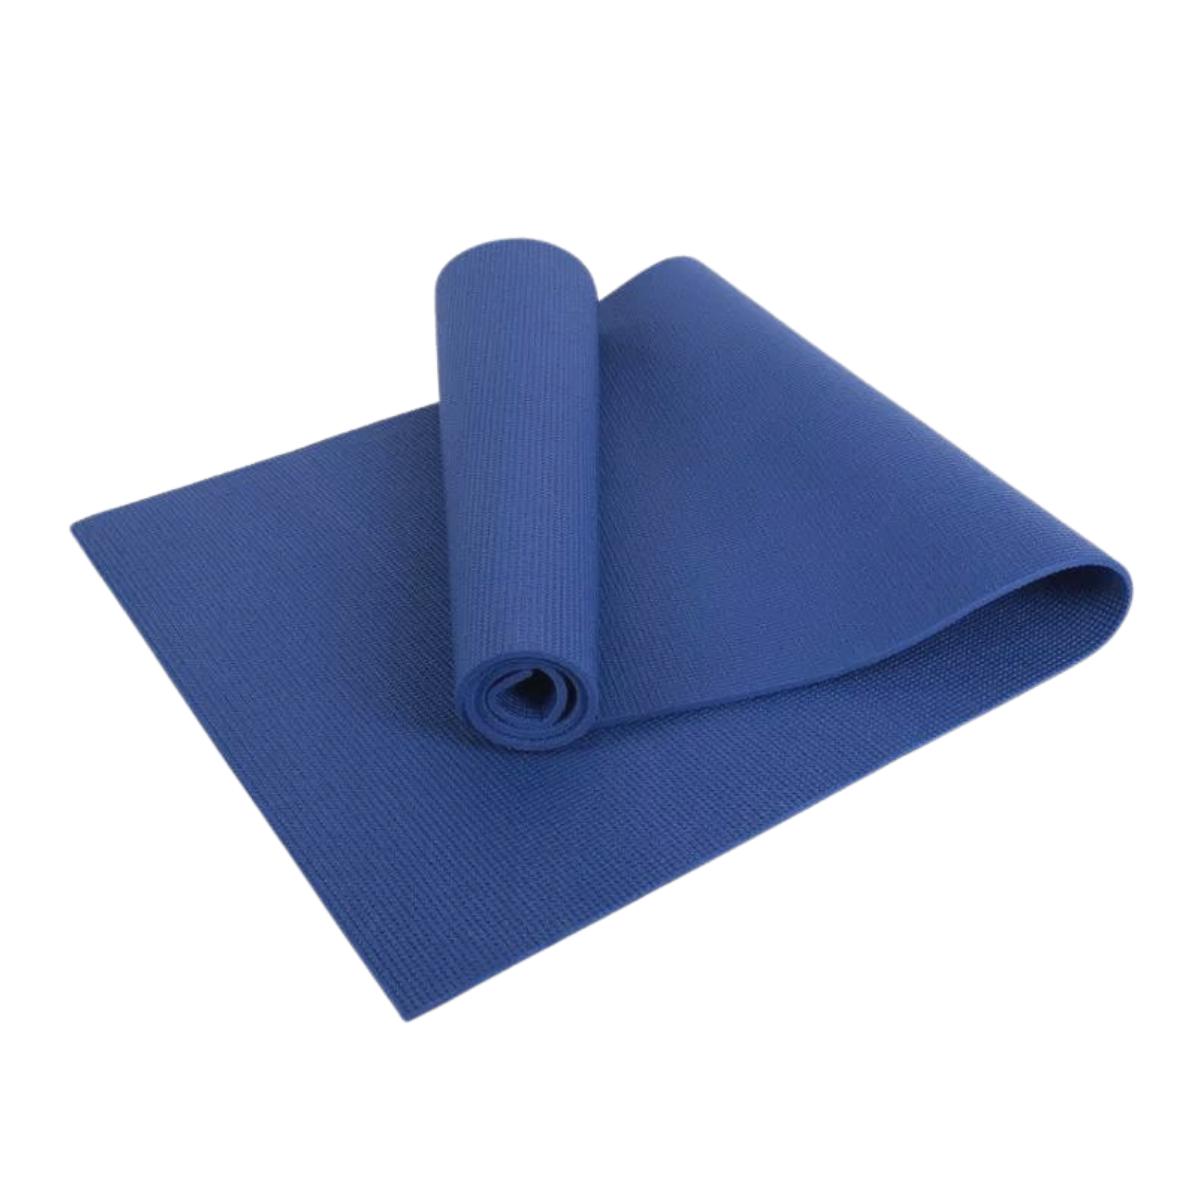 Performance Yoga Mat With Carrying Straps - Blue